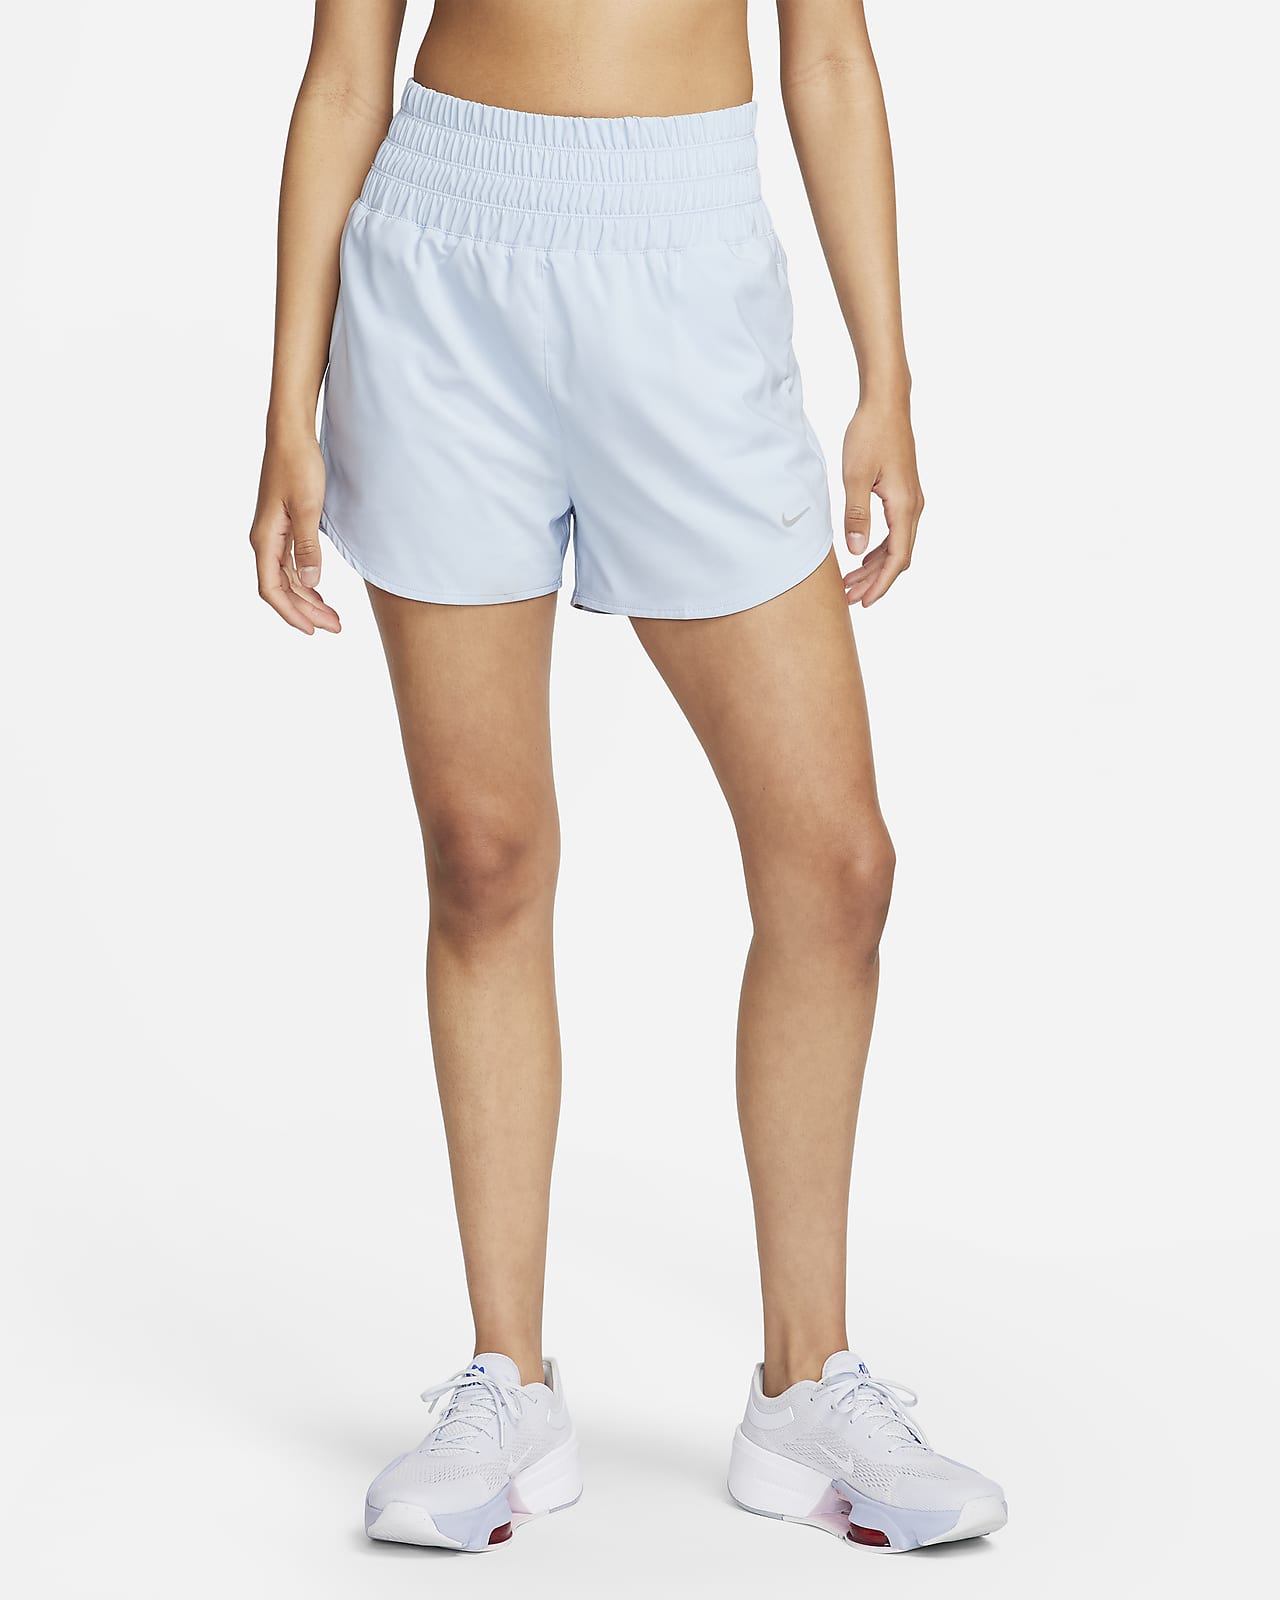 Nike One Women's Dri-FIT Ultra High-Waisted 8cm (approx.) Brief